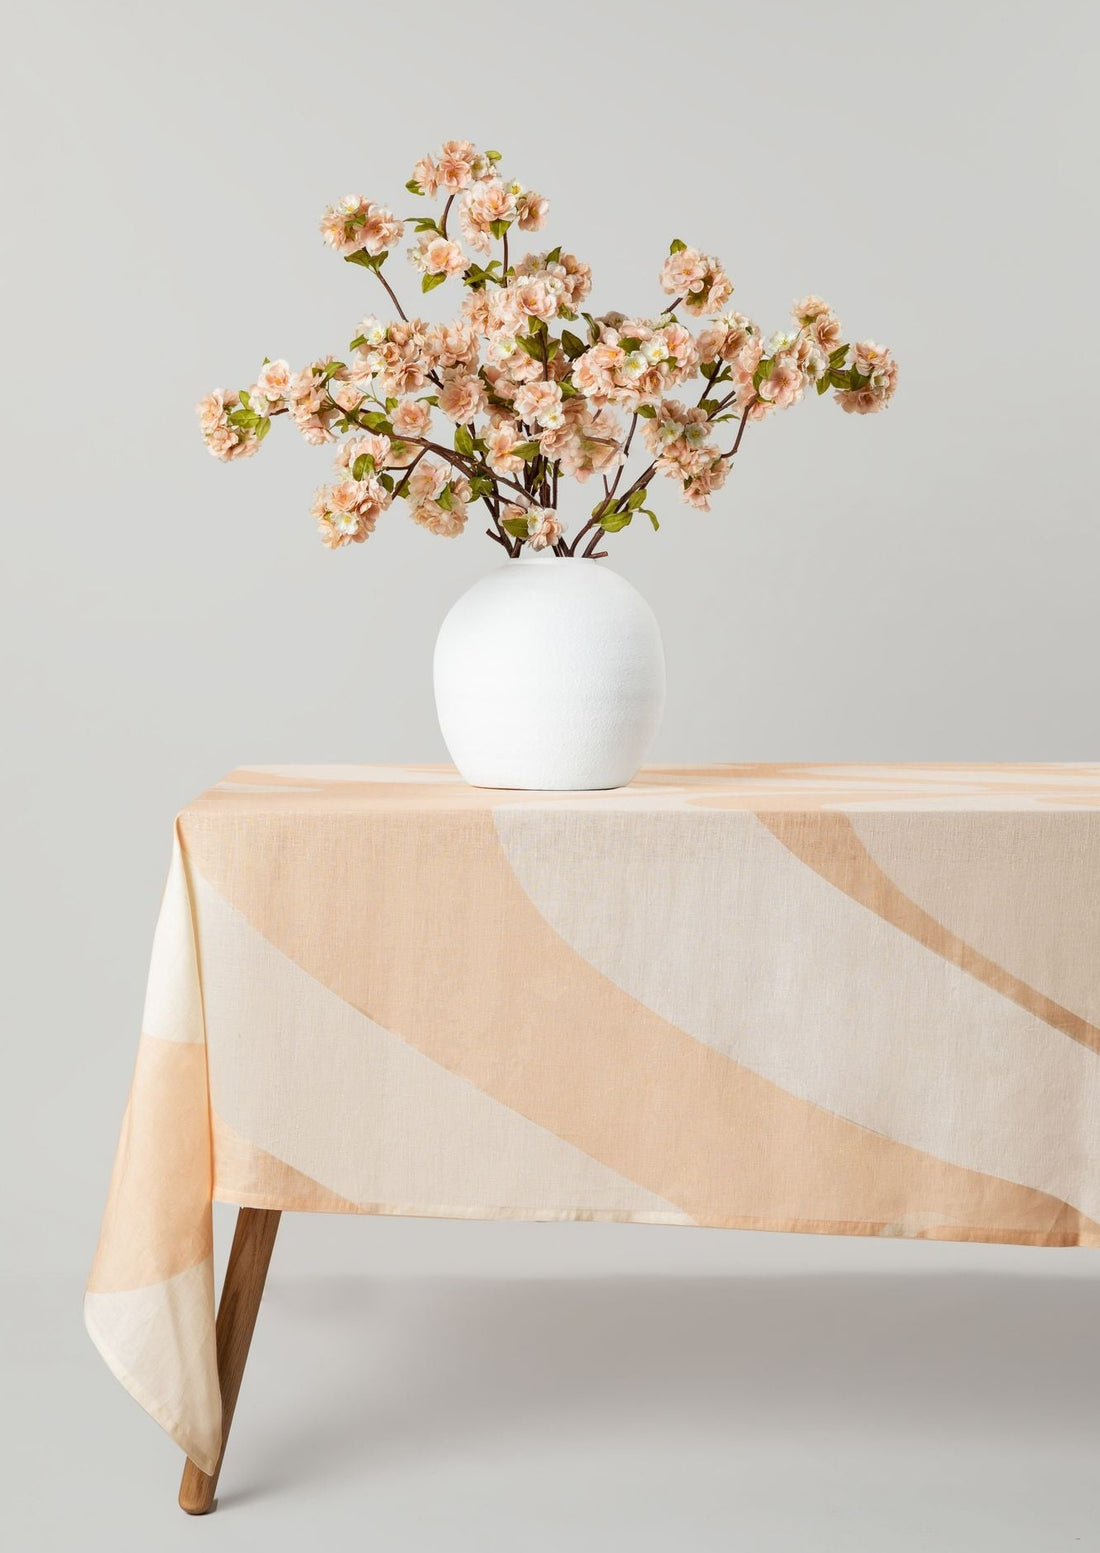 Linen Tablecloth in Sand with Artificial Peach Blossom Arrangement